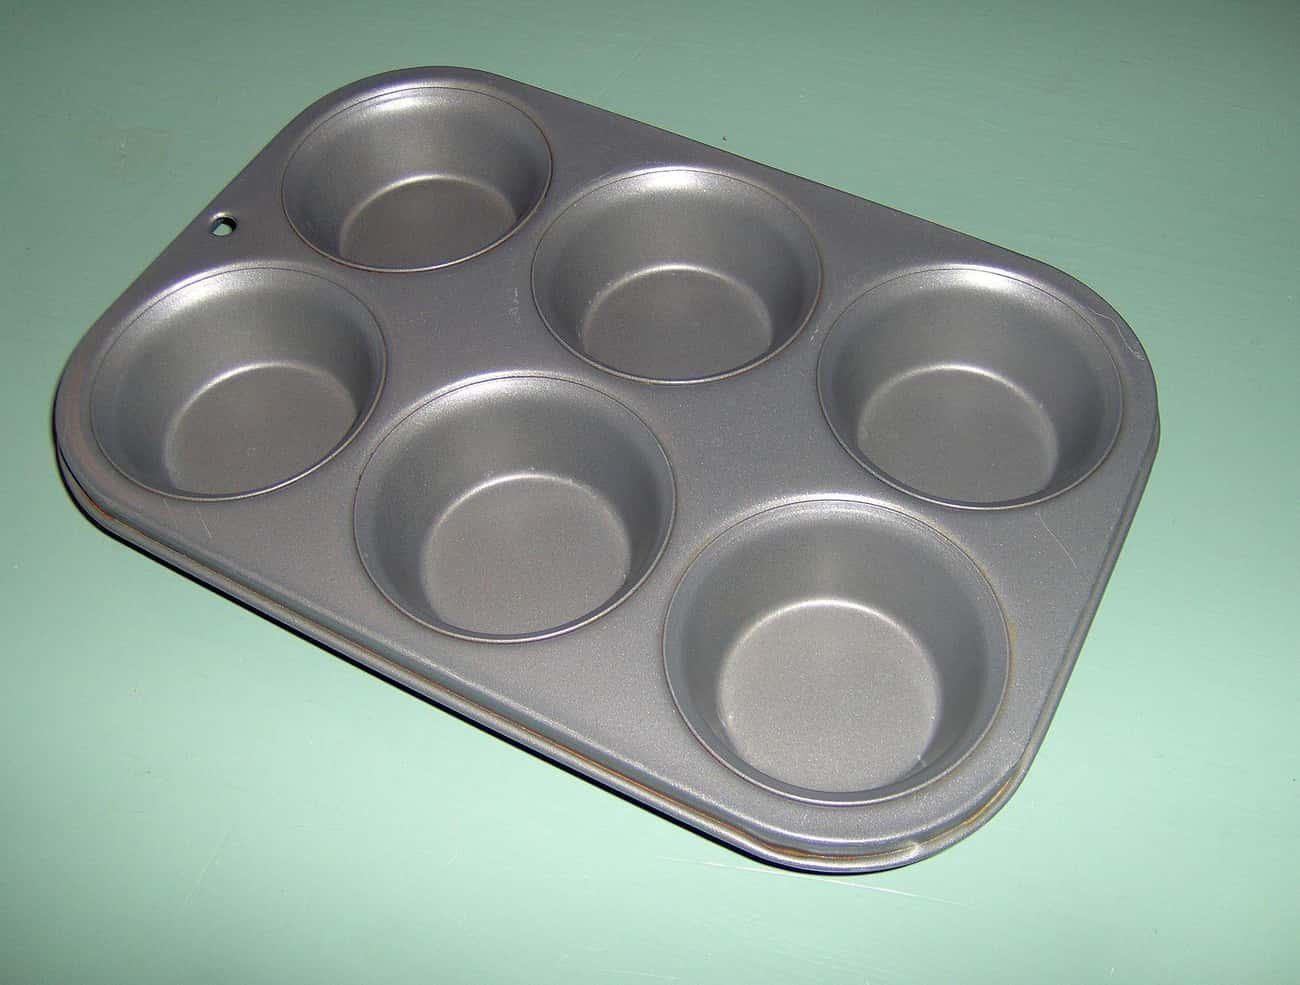 Serve Condiments In A Muffin Tray